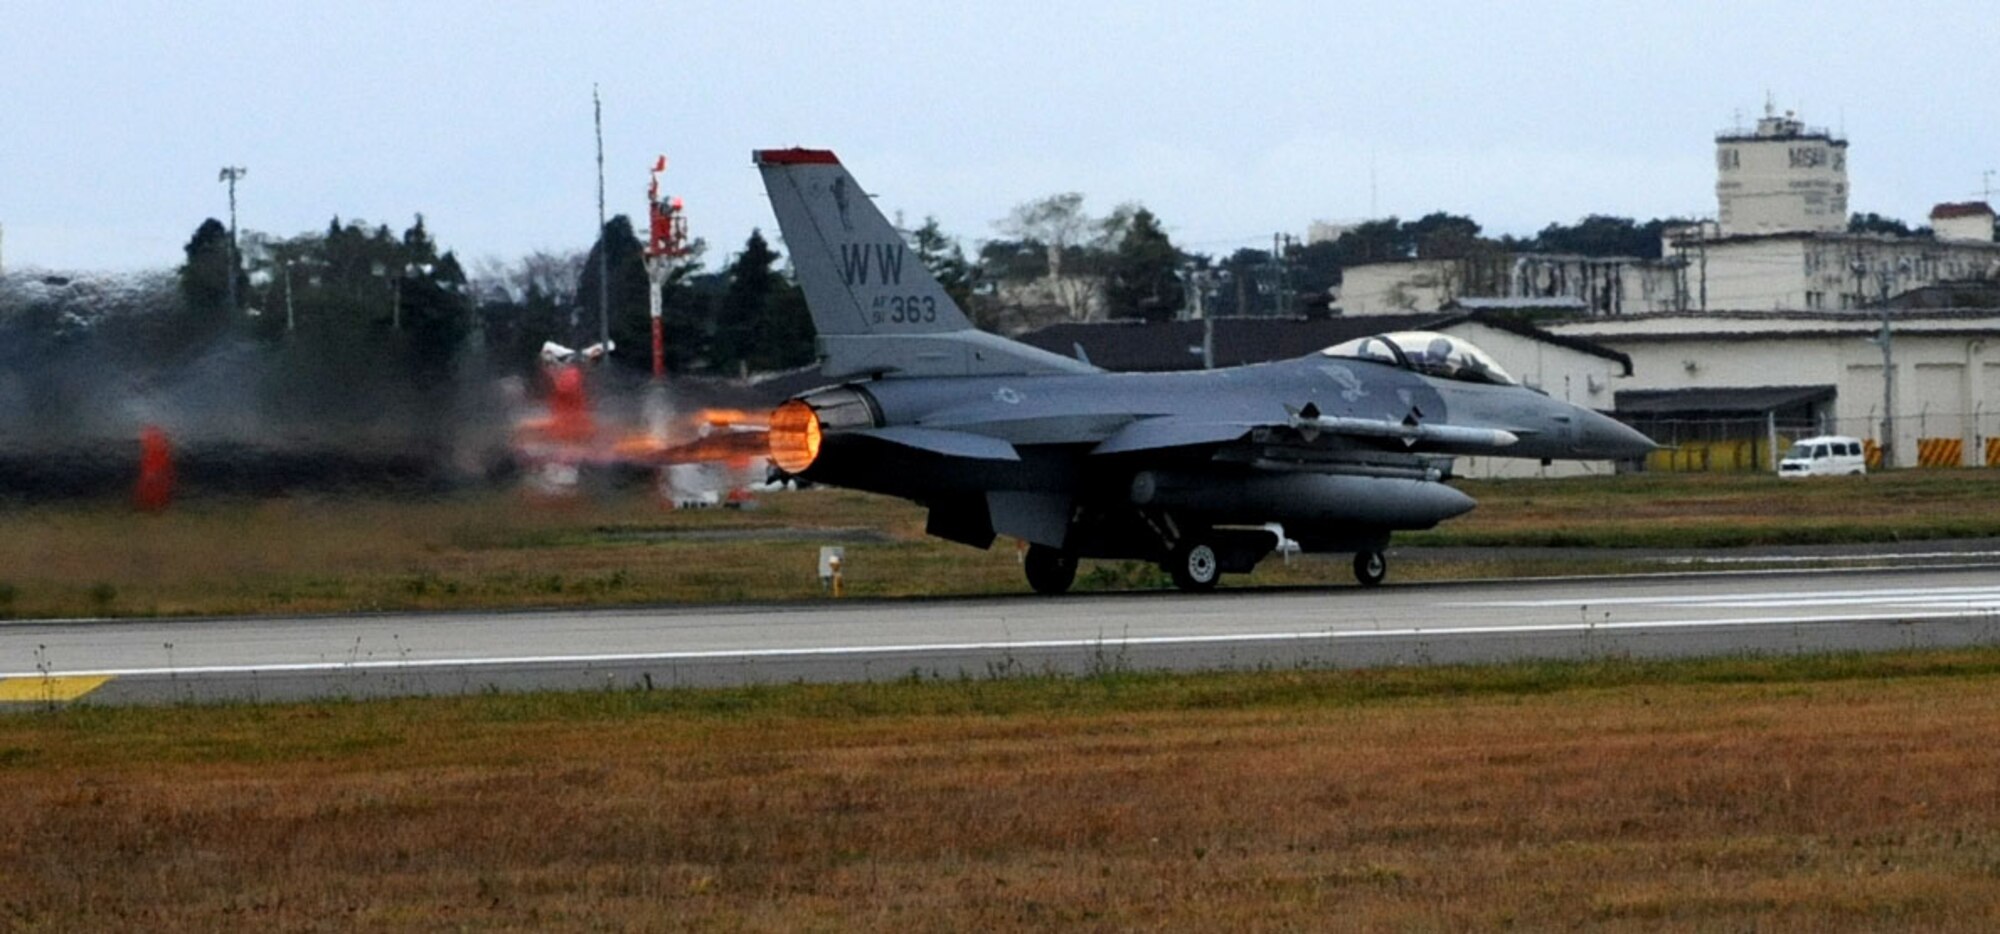 A U.S. Air Force F-16 Fighting Falcon aircraft takes off during Keen Sword 2013 at Misawa Air Base, Japan, Nov. 8, 2012. Keen Sword is a two-week long exercise that provides Airmen with an environment to enhance their mutual understanding of bilateral tactics, communication protocols and general interoperability. (U.S. Air Force photo by Airman 1st Class Kenna Jackson)